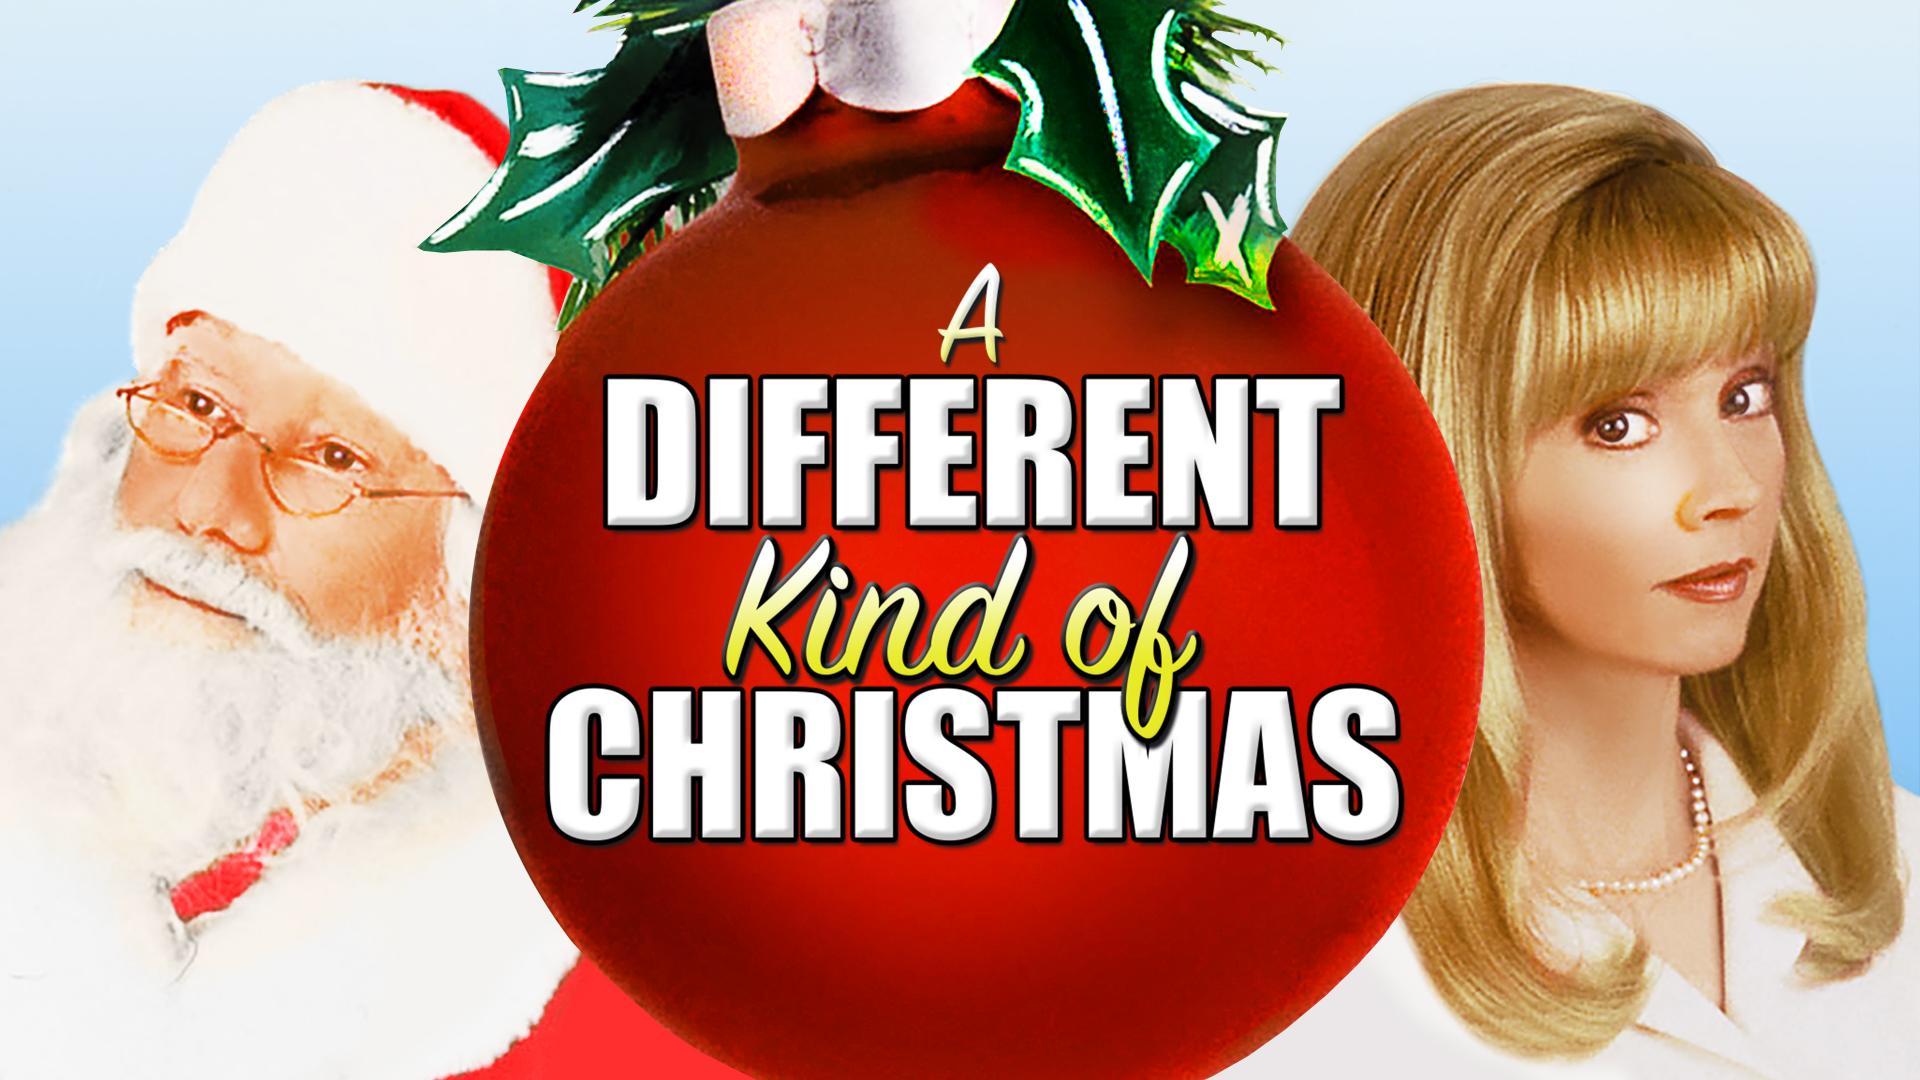 Watch A Different Kind of Christmas Online | Stream Full Movies